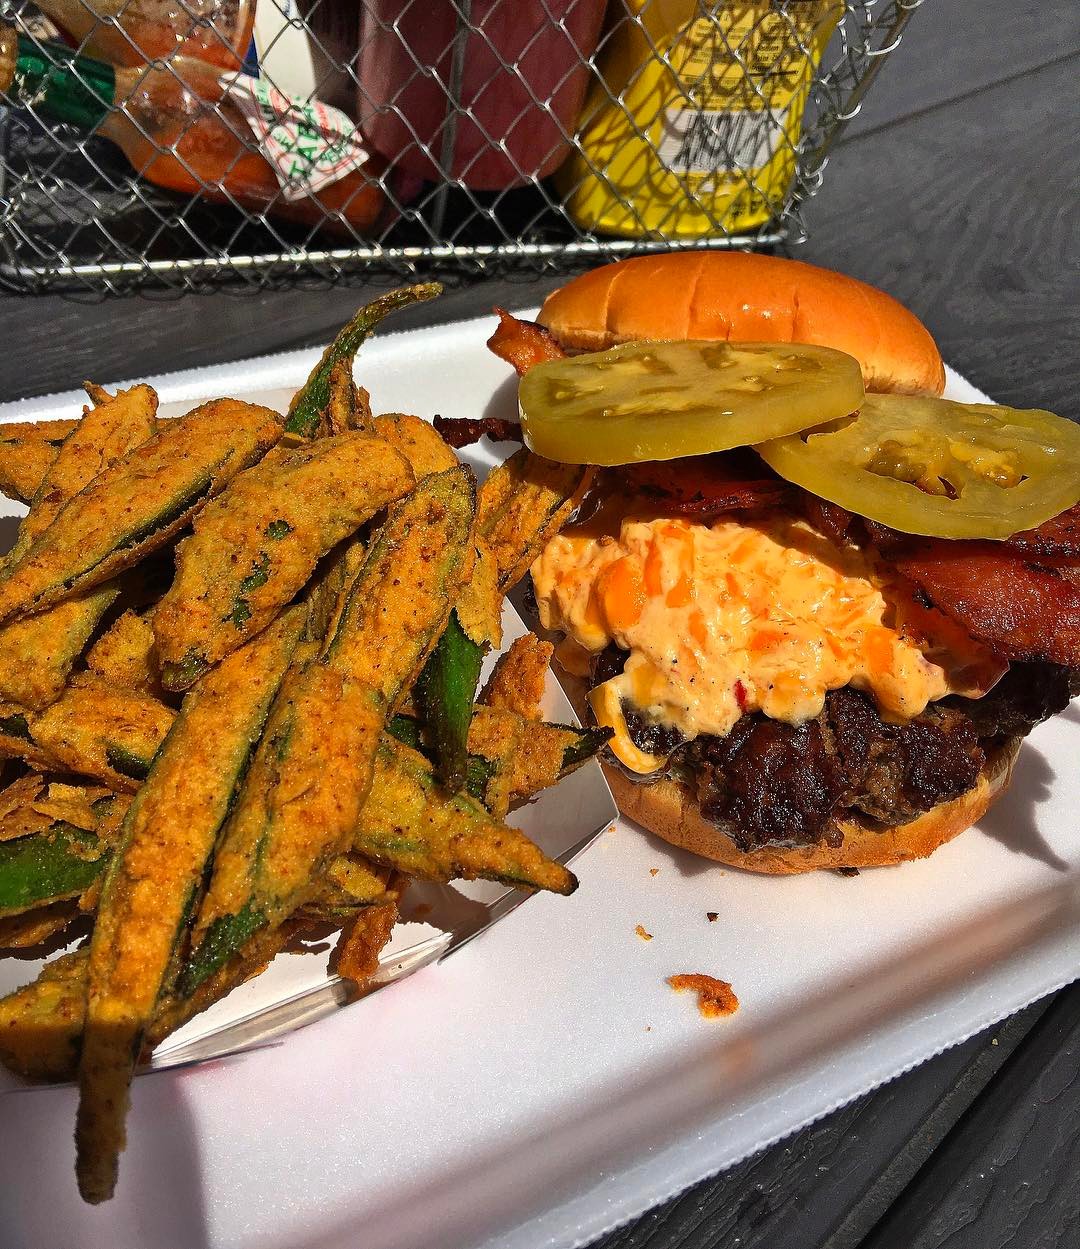 burger pimiento cheese fried okra saws soul kitchen 7 local restaurants who just make okra to perfection